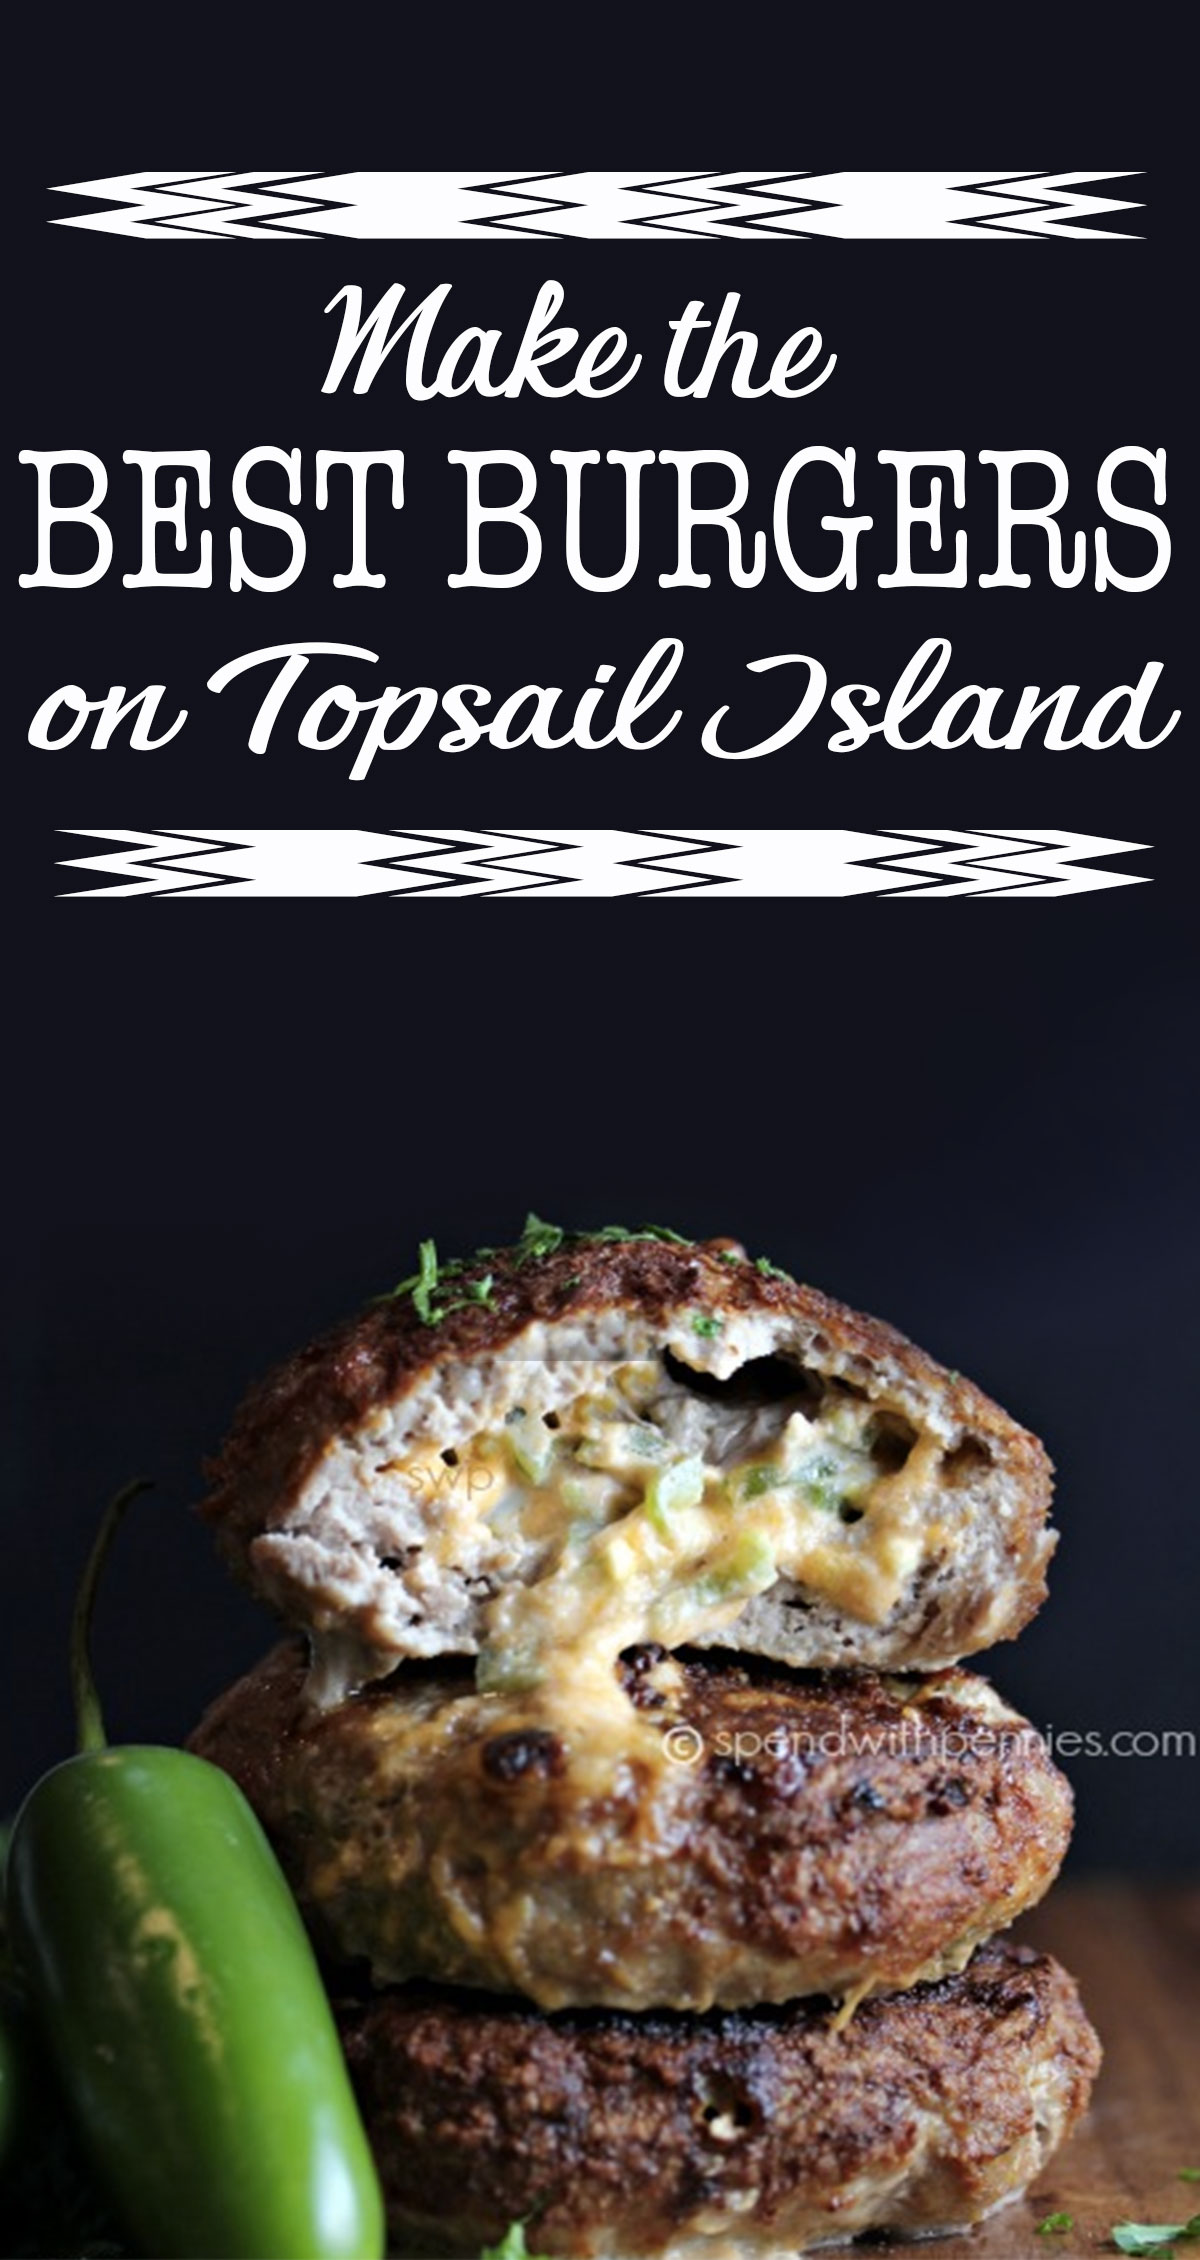 How to Make the Best Burgers on Topsail Island